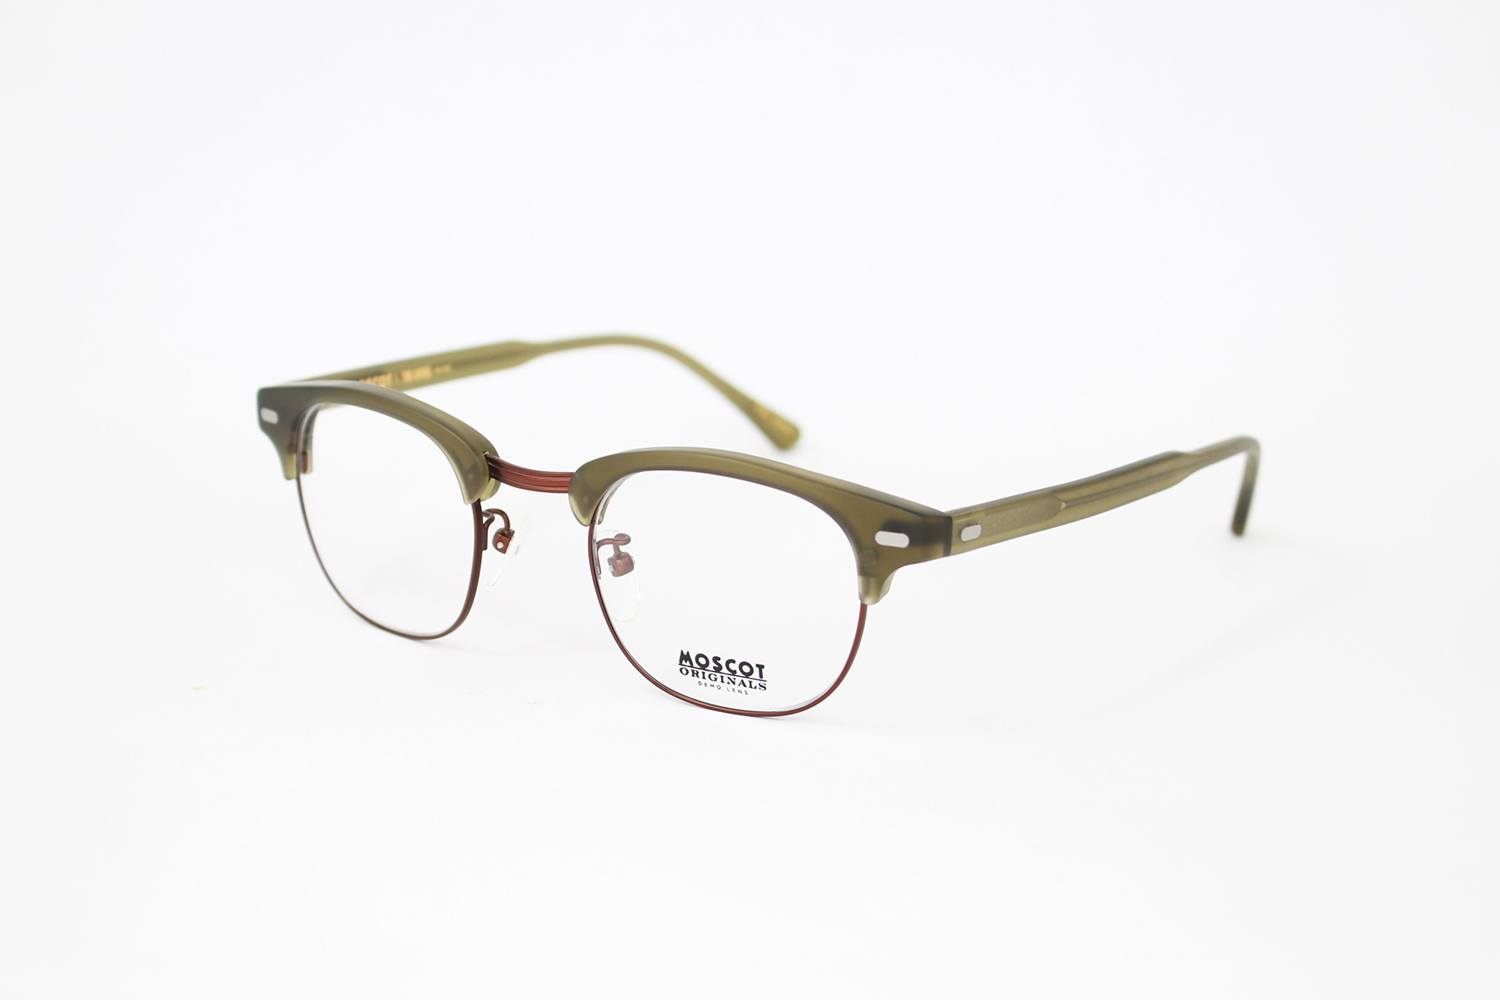 MOSCOT×TODD SNYDERYUKEL 46 | The PARKSIDE ROOM 吉祥寺｜メガネの 